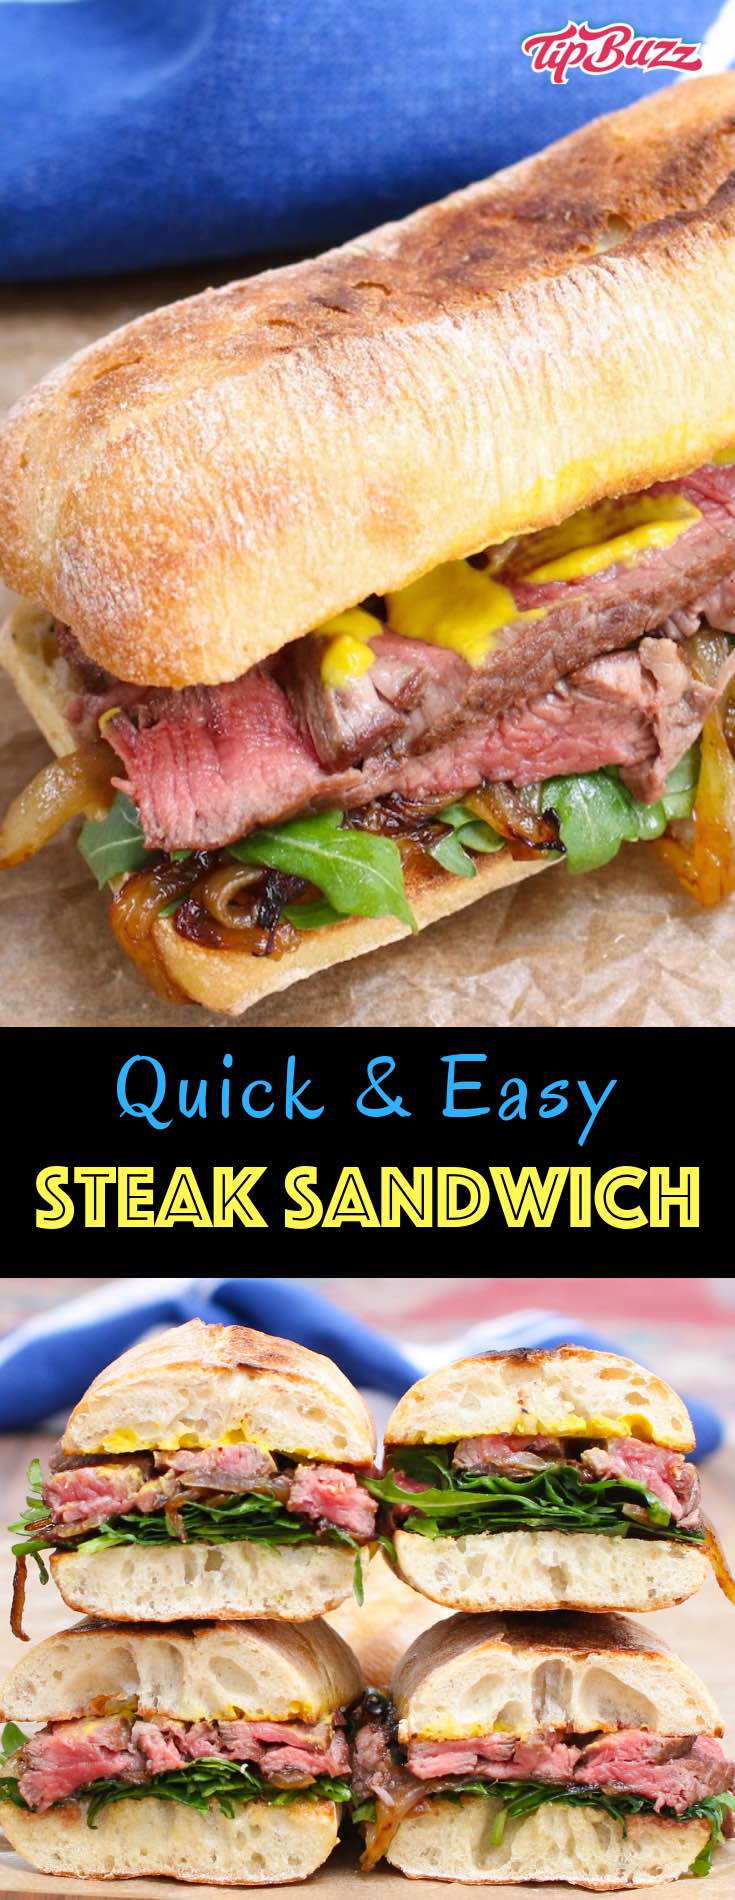 Steak Sandwich is a hearty and flavorful sandwich loaded with tender and thinly-sliced steak, green vegetables, caramelized onions and mustard, along with the nicely toasted bread. #SteakSandwich